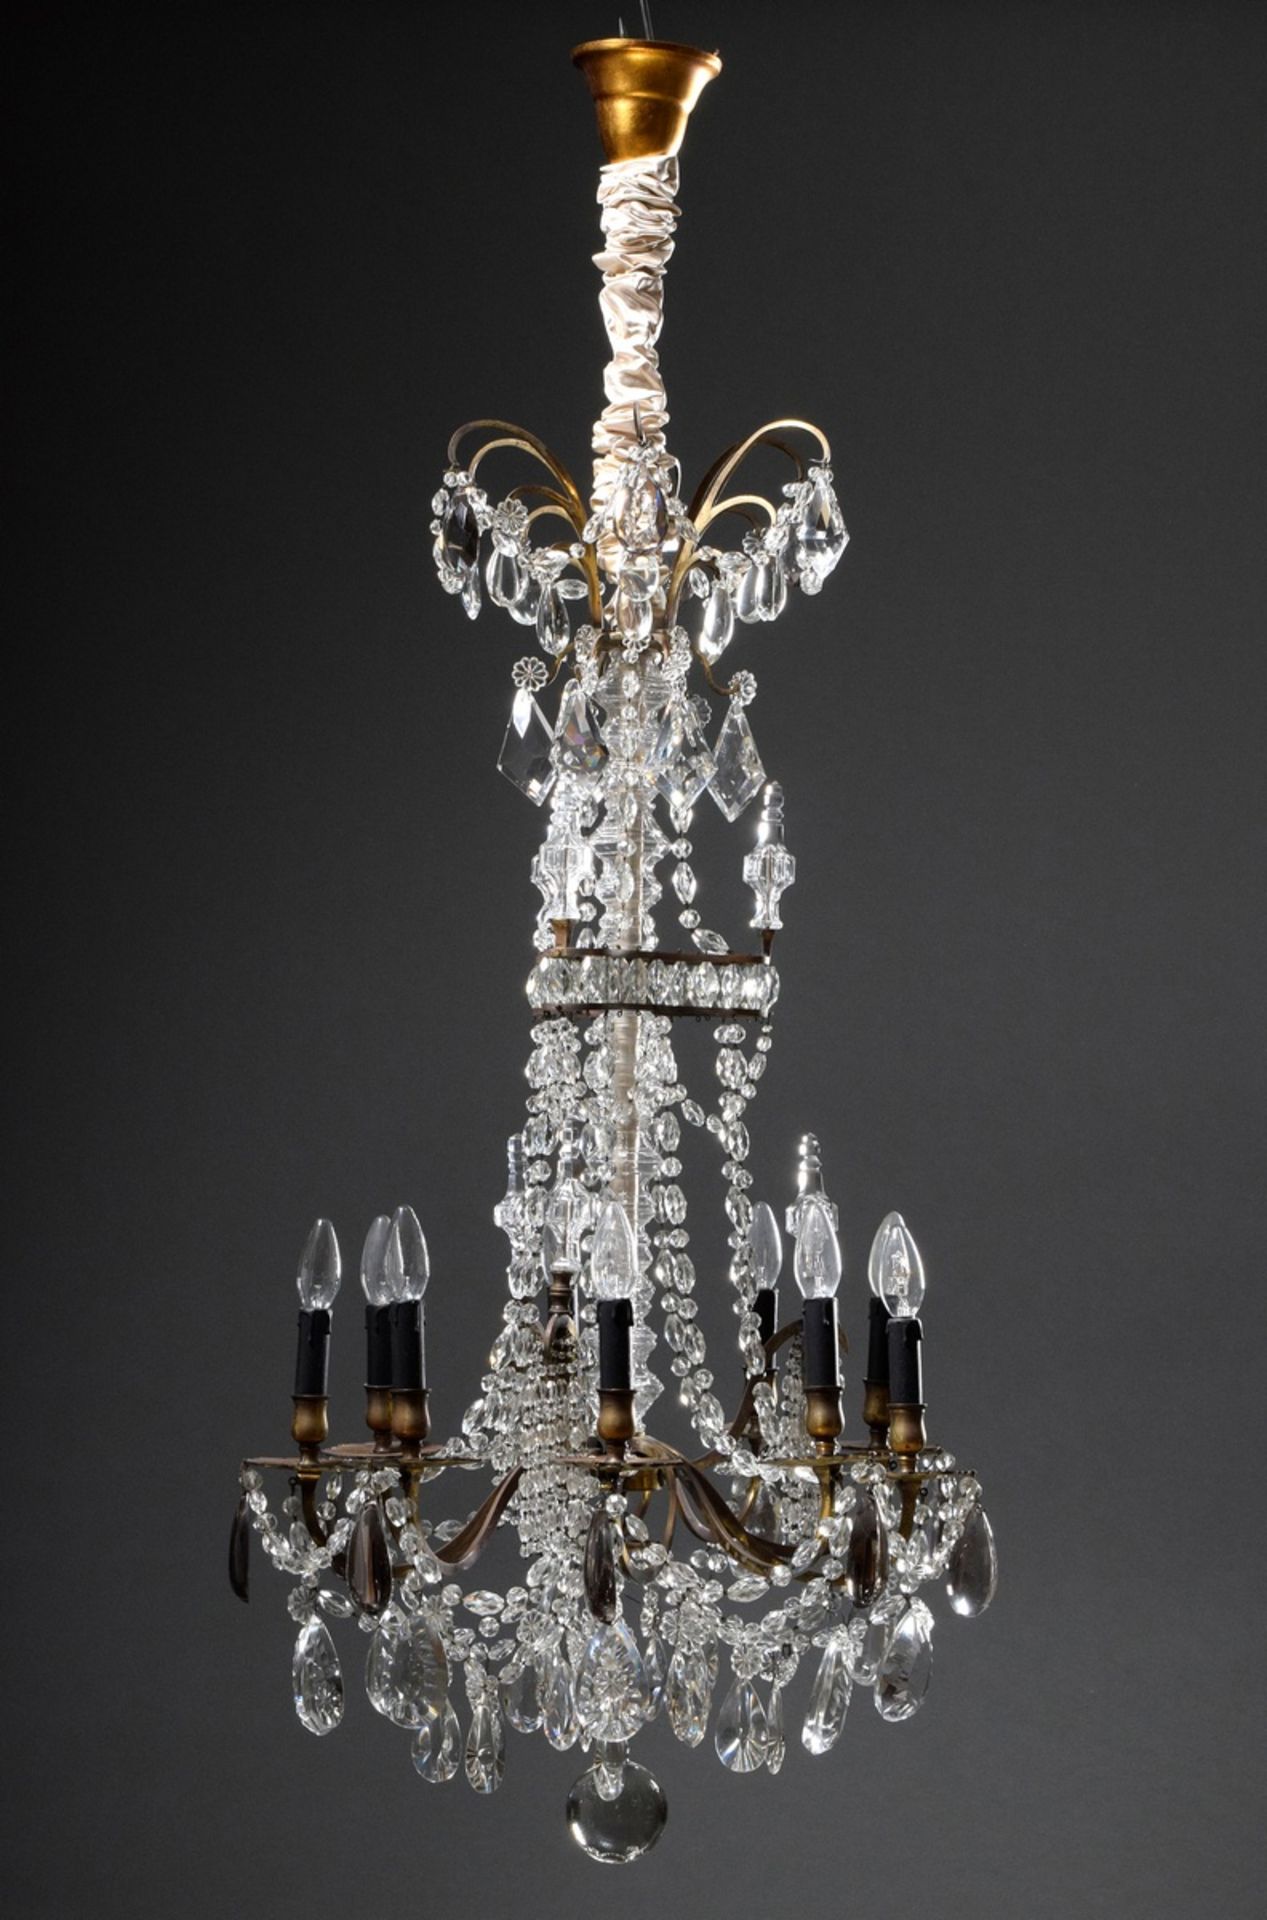 Fire-gilt bronze chandelier with elaborate prismatic hangings and cut balusters on a triangular bas